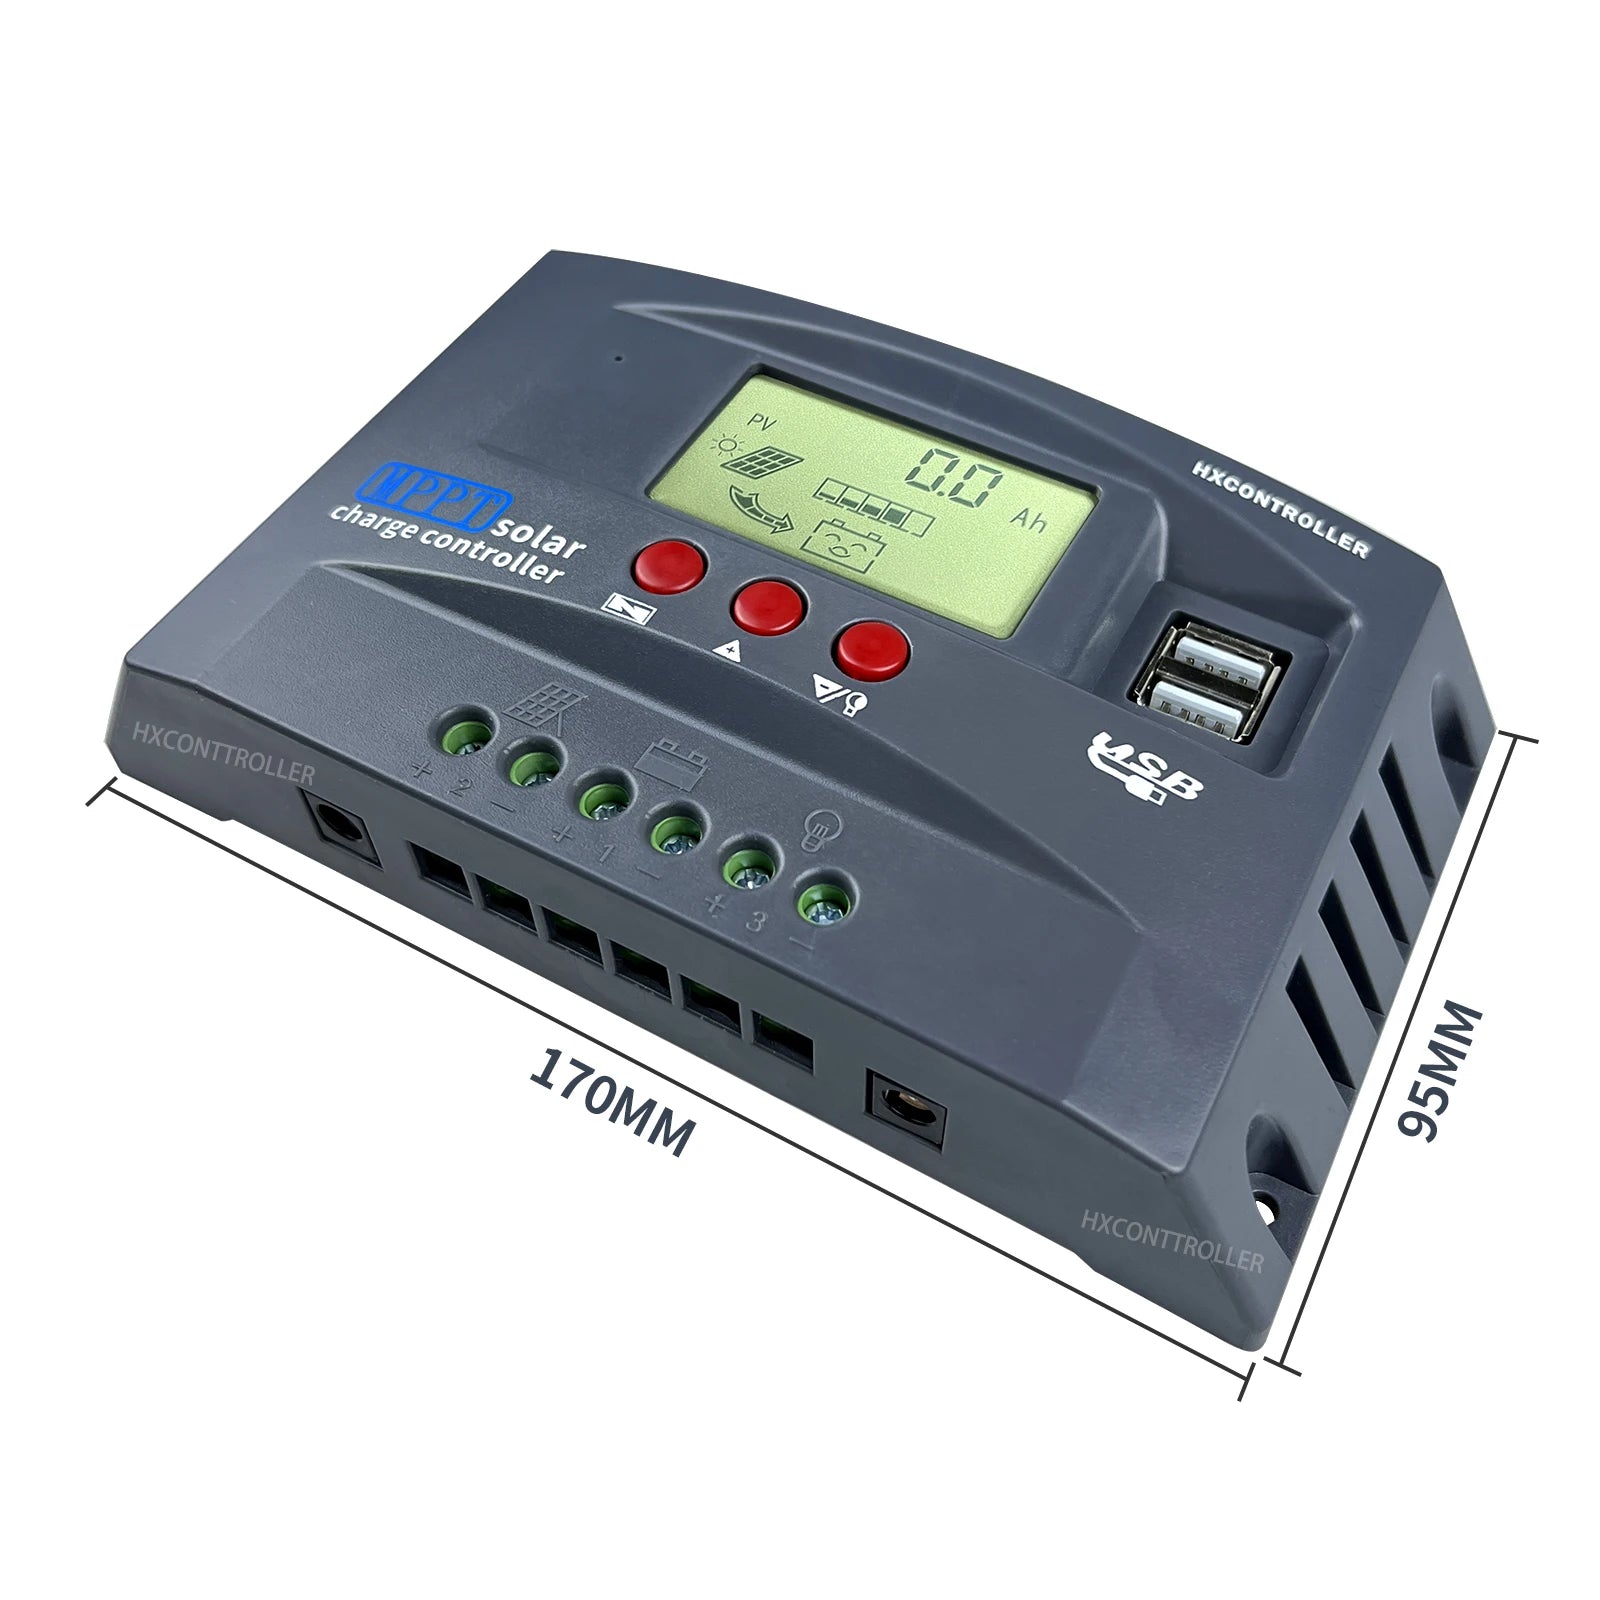 MPPT 720W 480W 360W 240W Solar Charge Controller, Solar charge controller regulates MPPT/PWM solar panels, 38V/8A output, compact 170mm design.